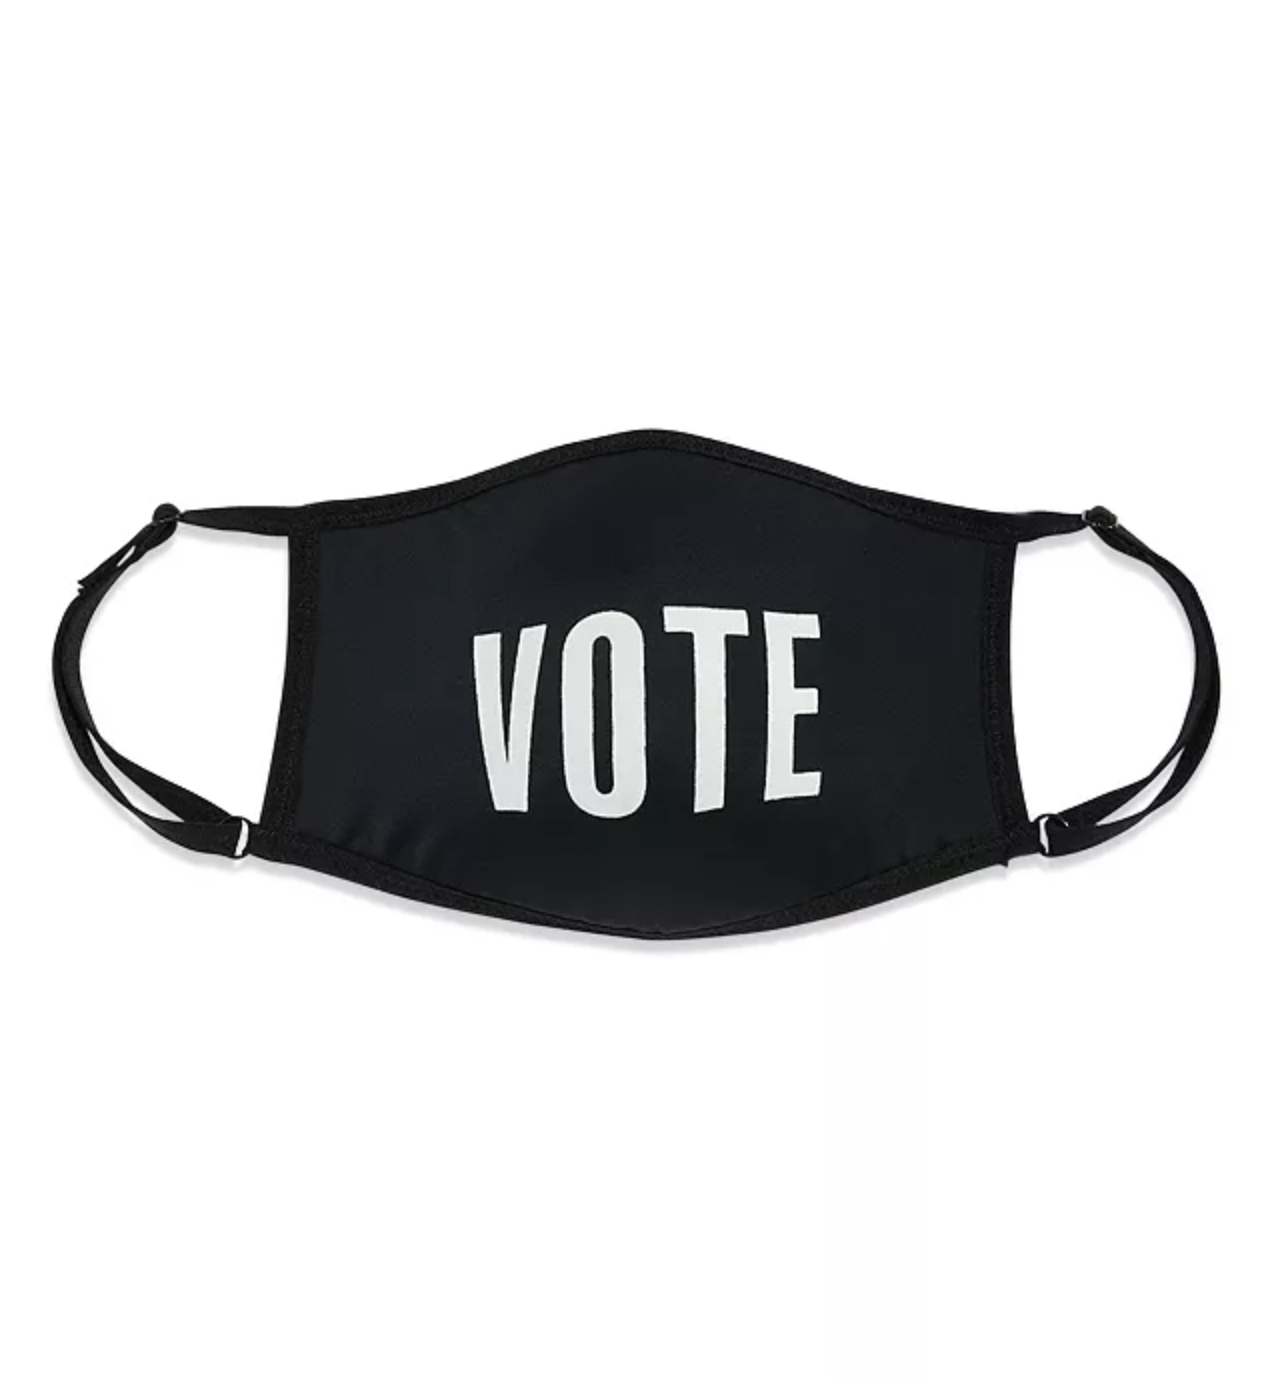 When We All Vote Face Masks, Set of 2